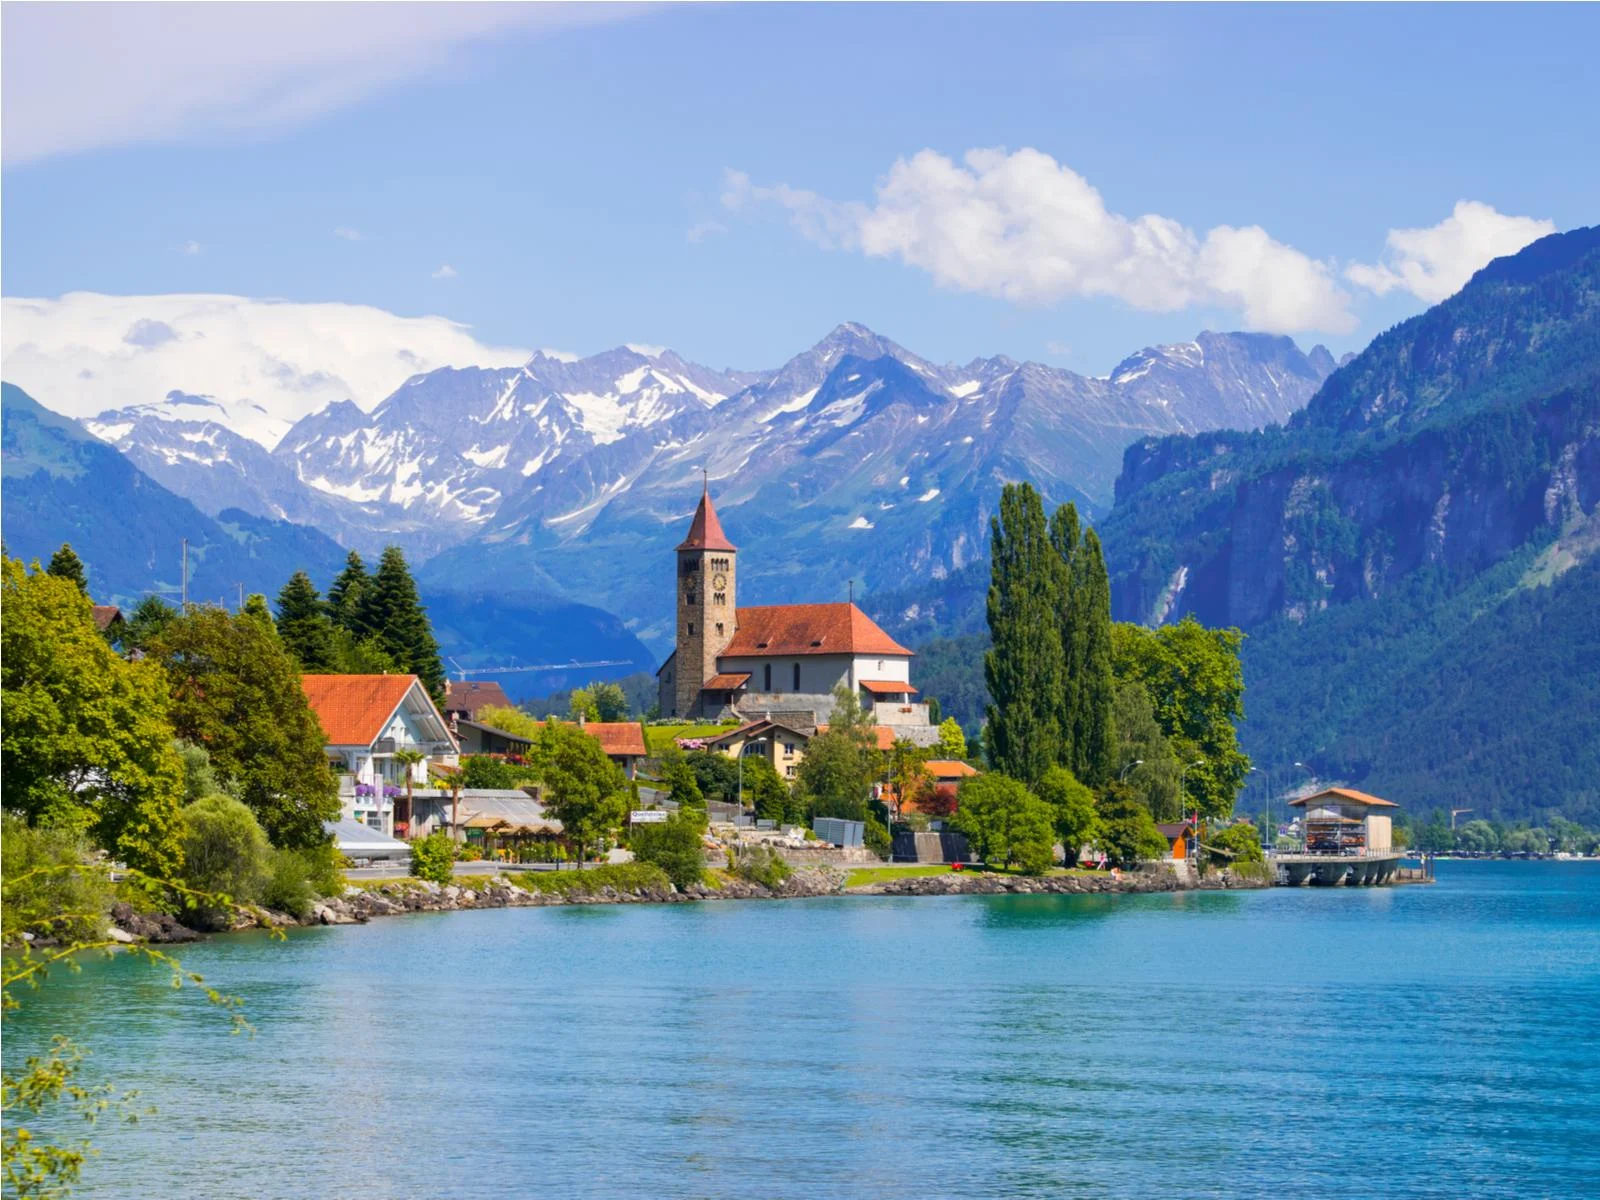 Panoramic view of Brienze town on Lake Brienz by Interlaken for a piece on the best time to visit Switzerland